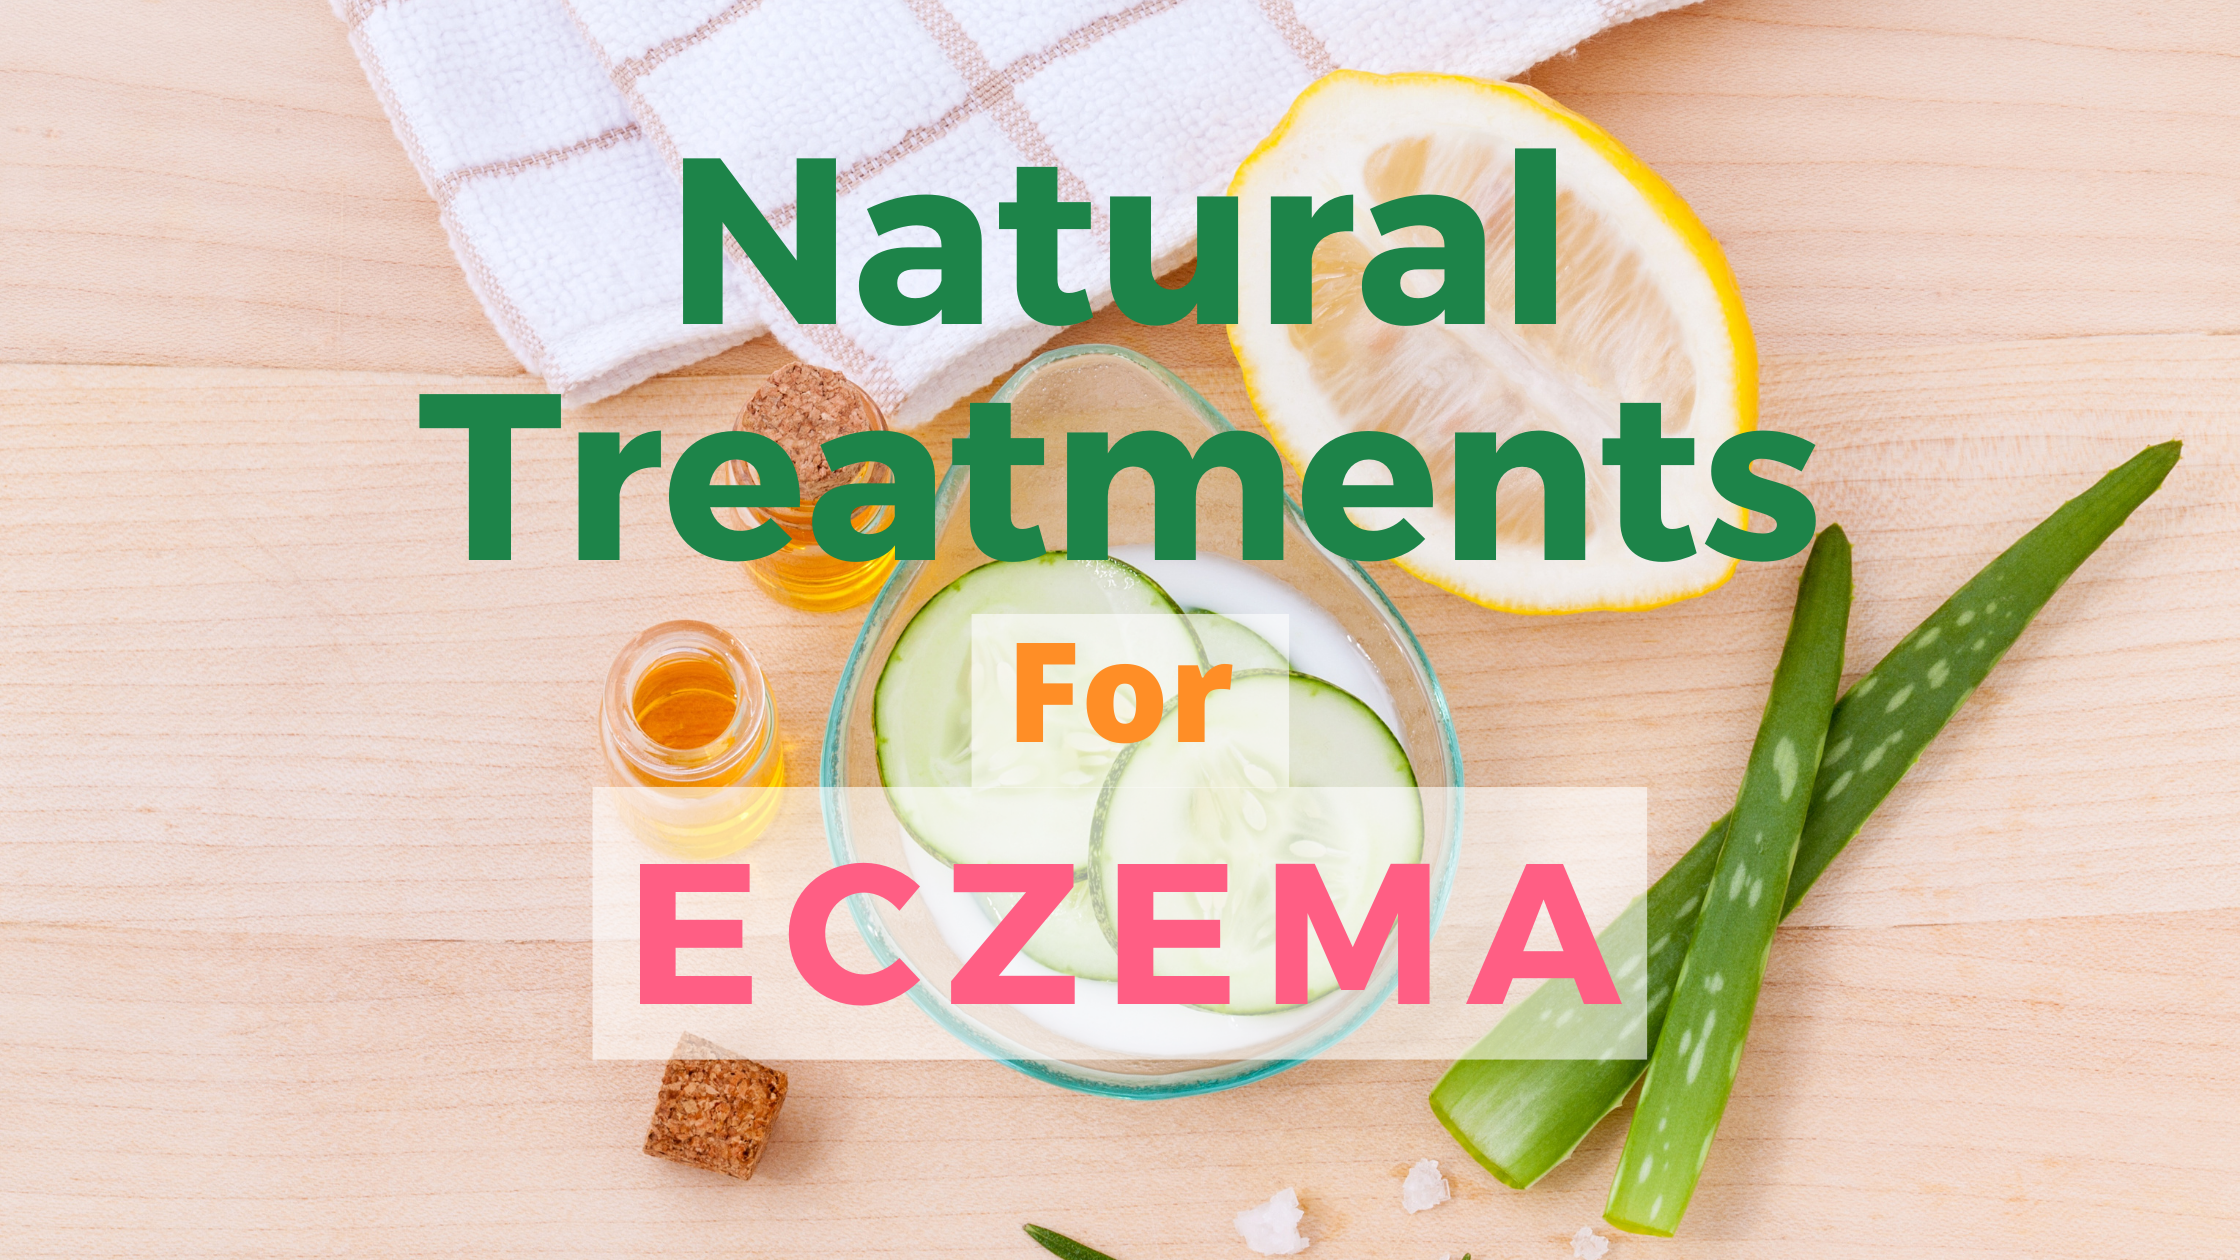 Natural Treatments for Eczema